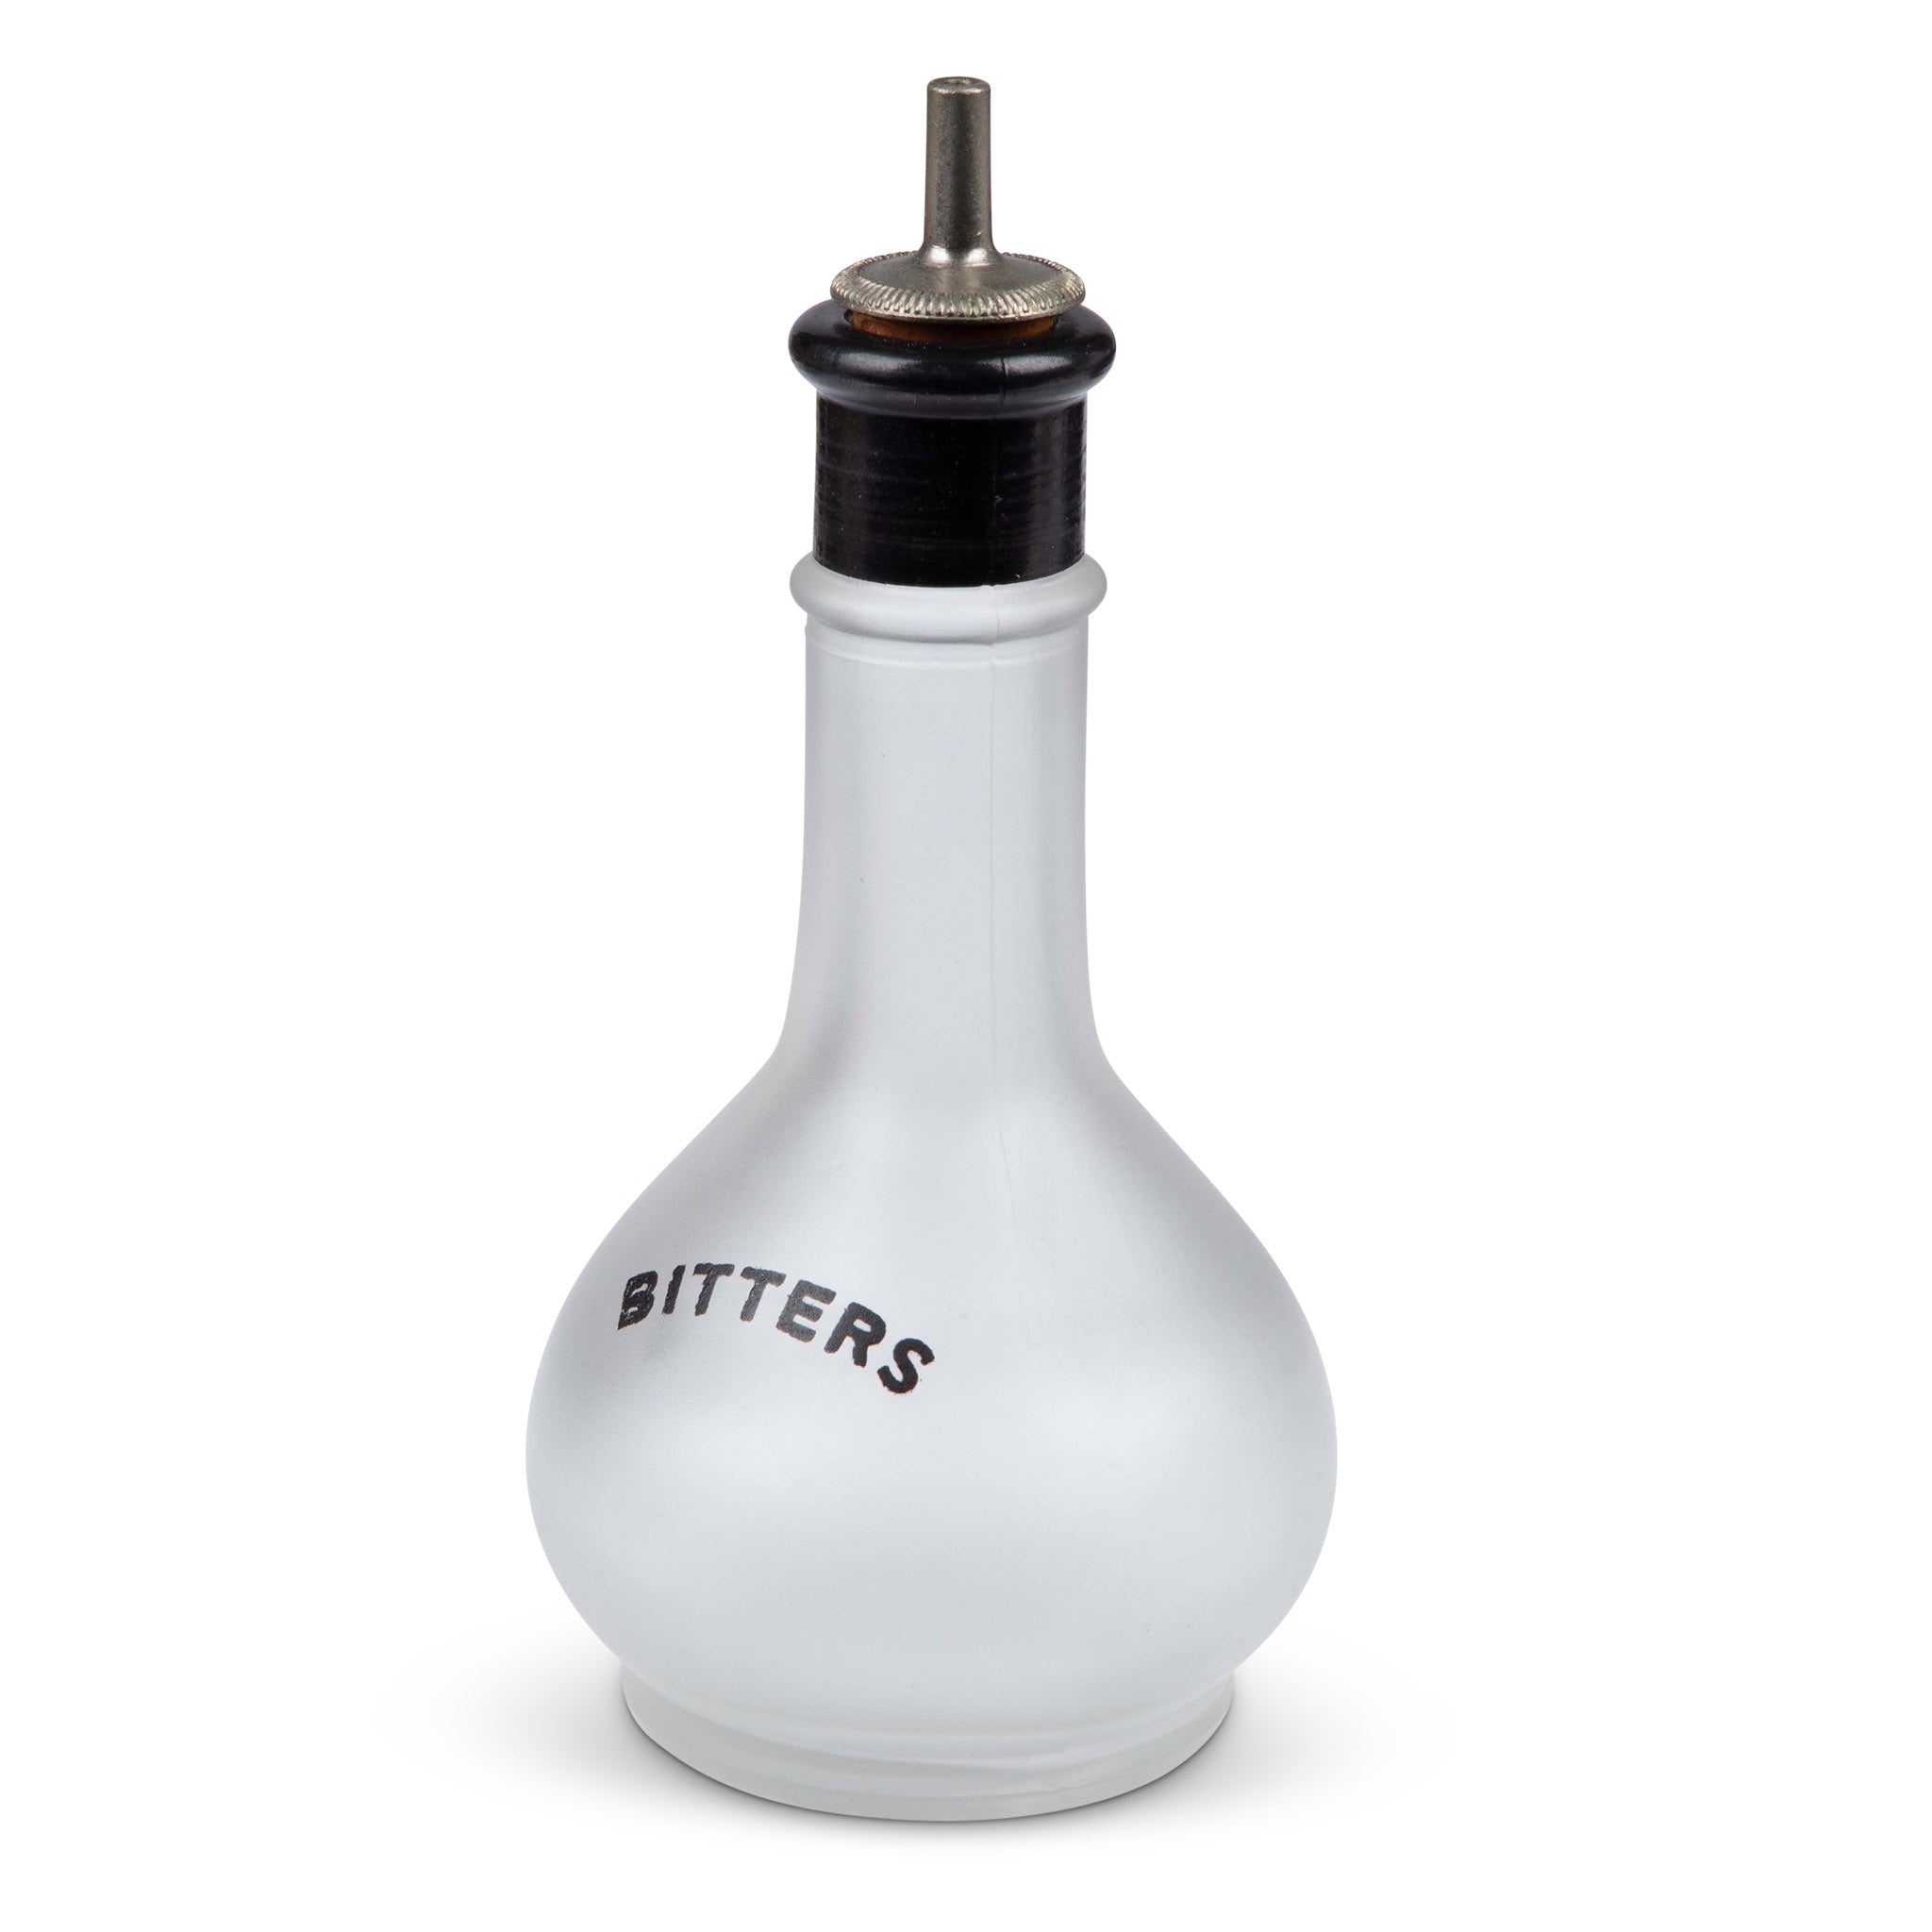 Vintage Frosted Glass Cocktail Bitters Bottle